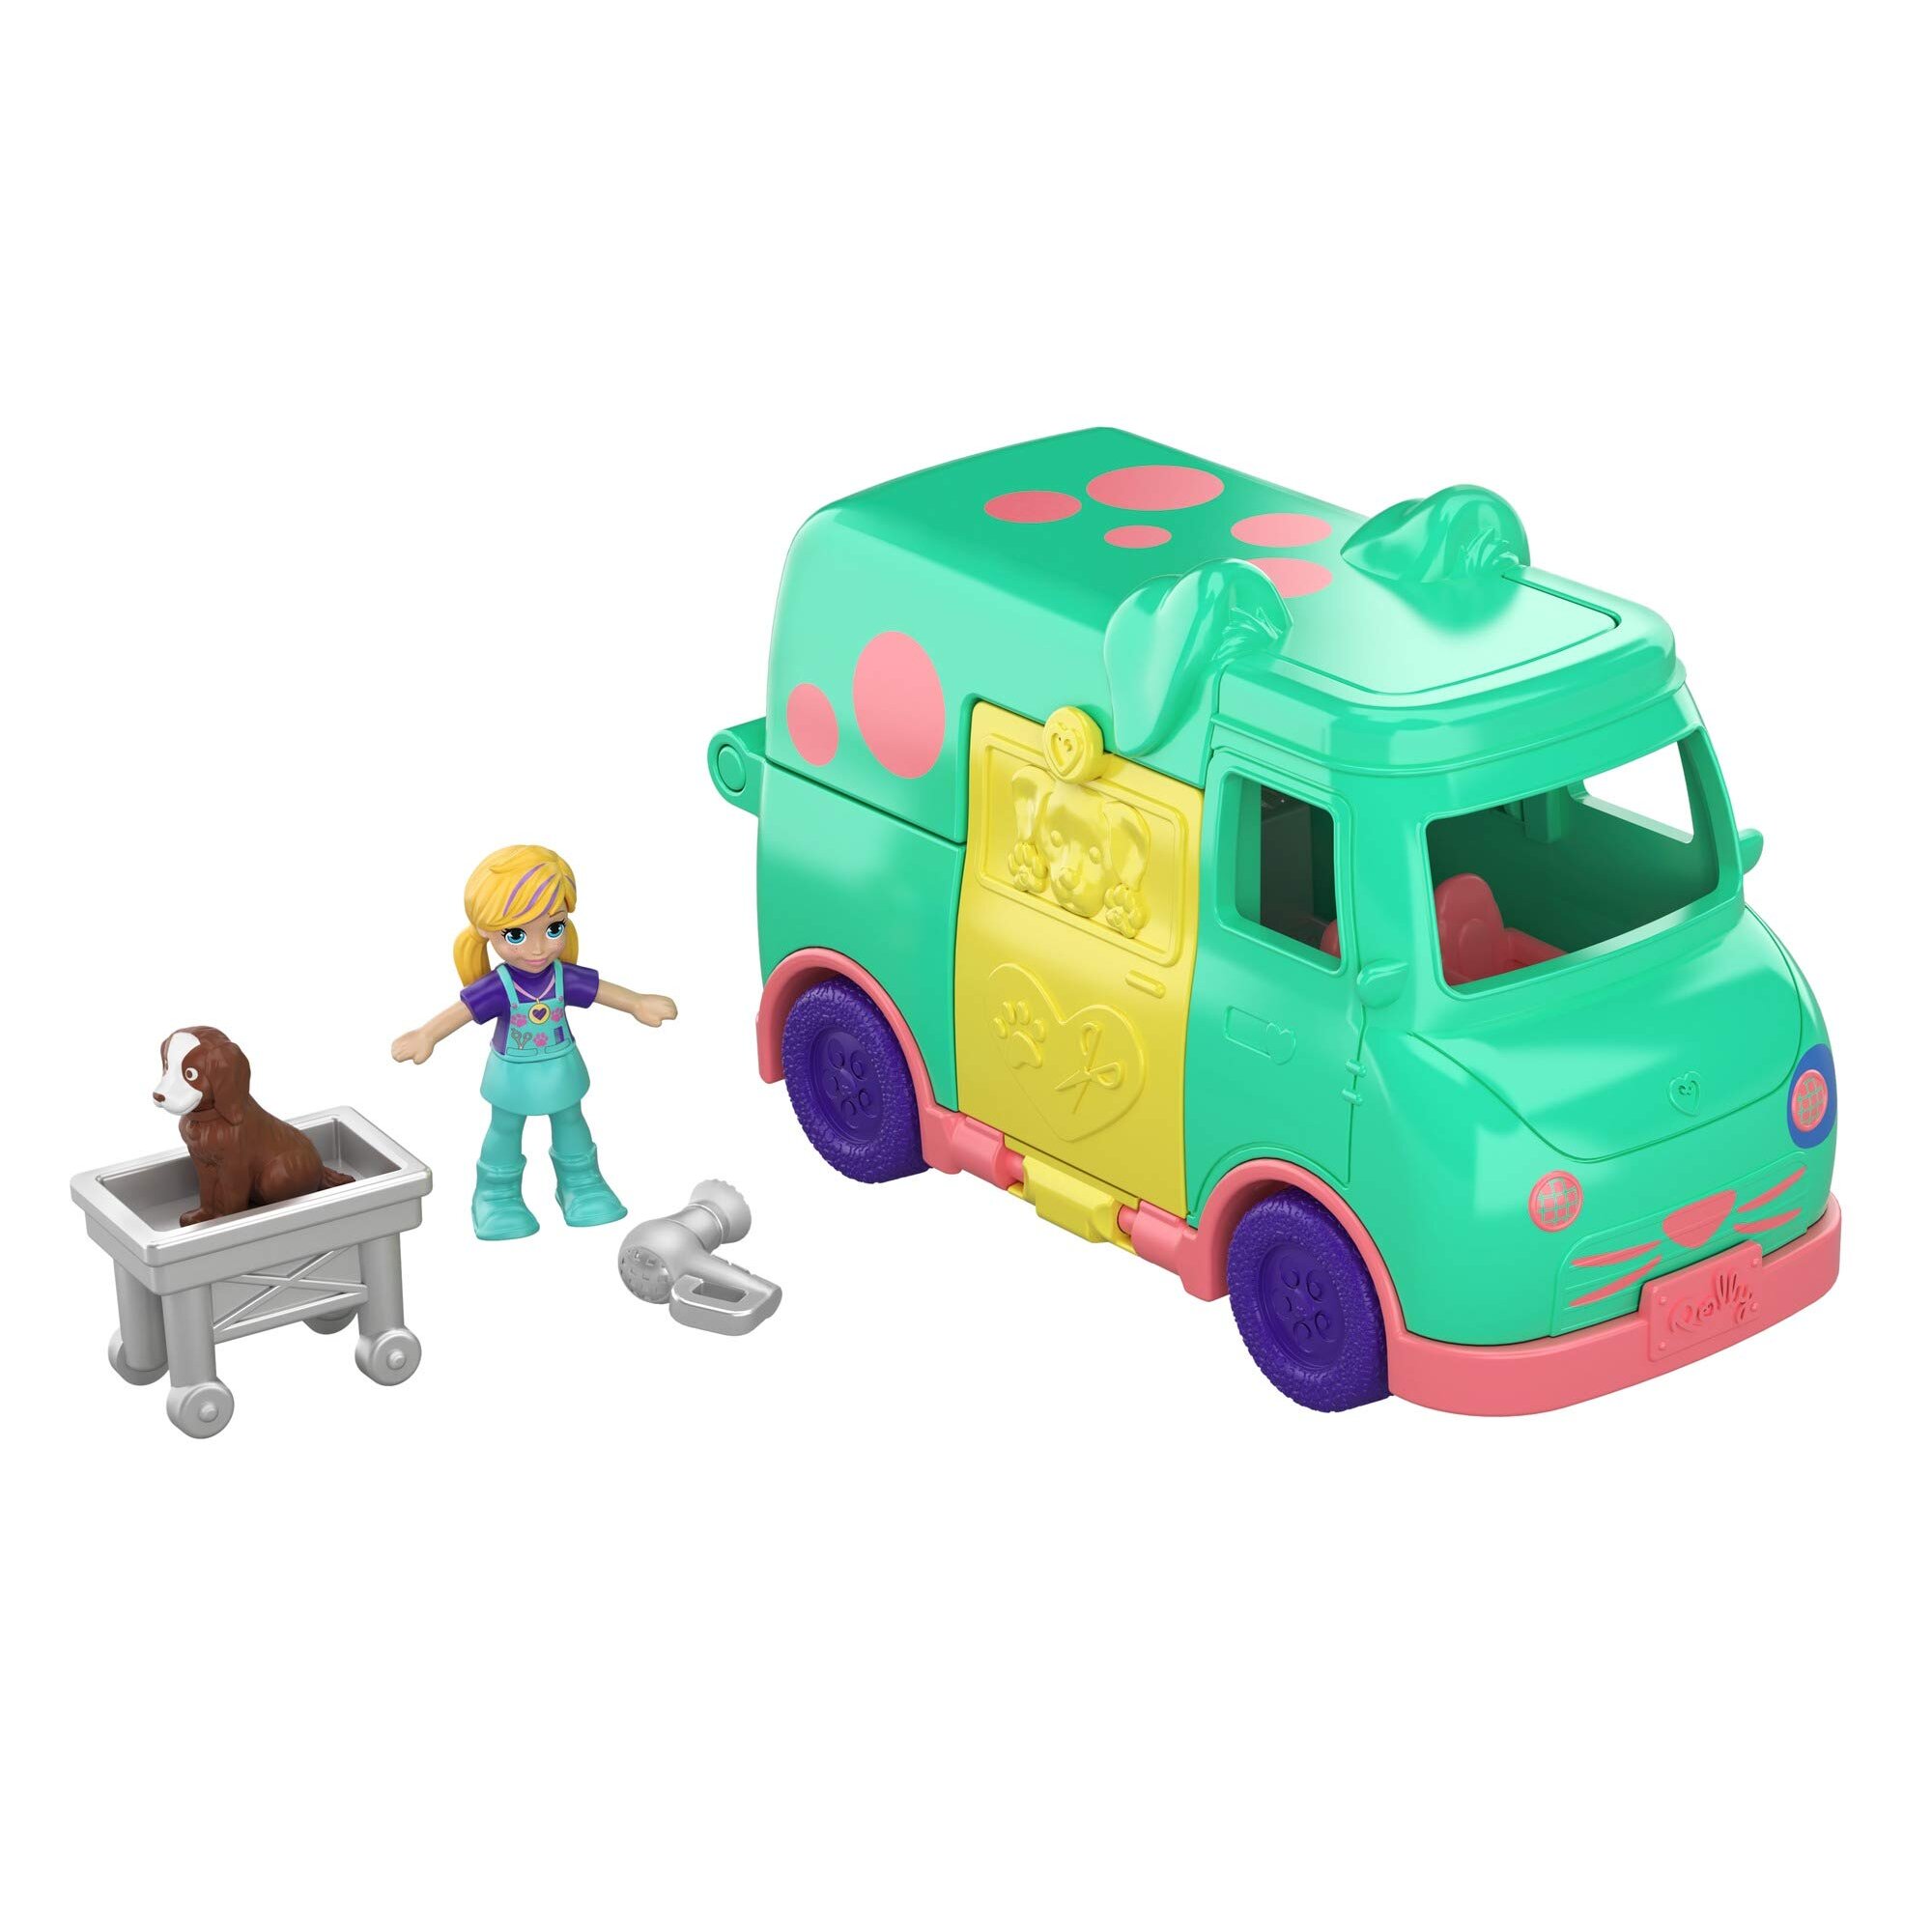 Polly Pocket Pollyville Pet Groomer Vehicle Playset